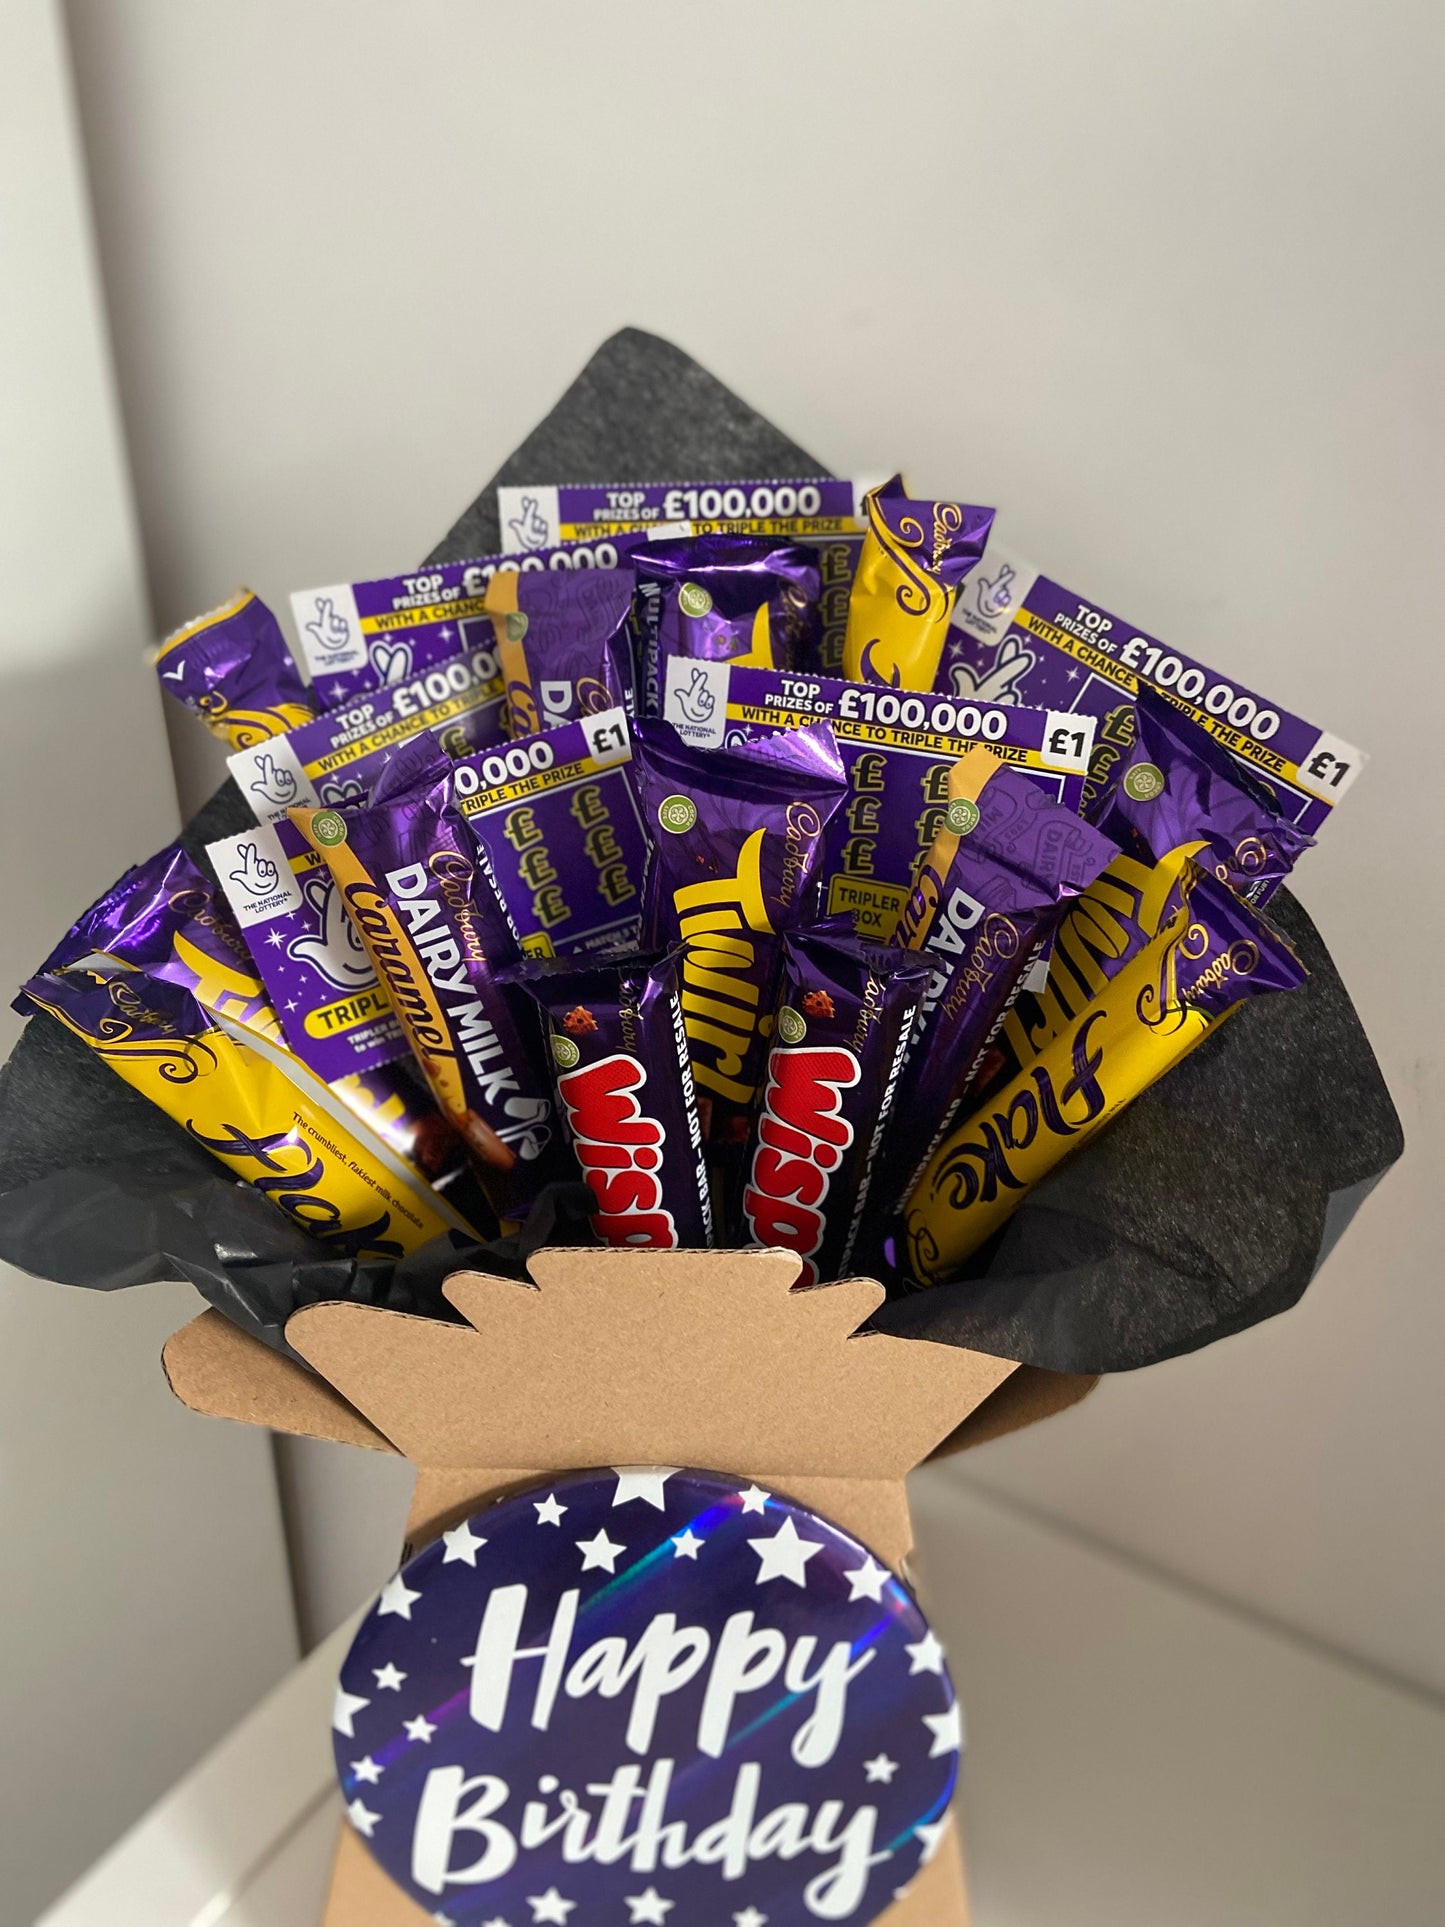 Birthday bouquet with Cadburys chocolate and scratchcards